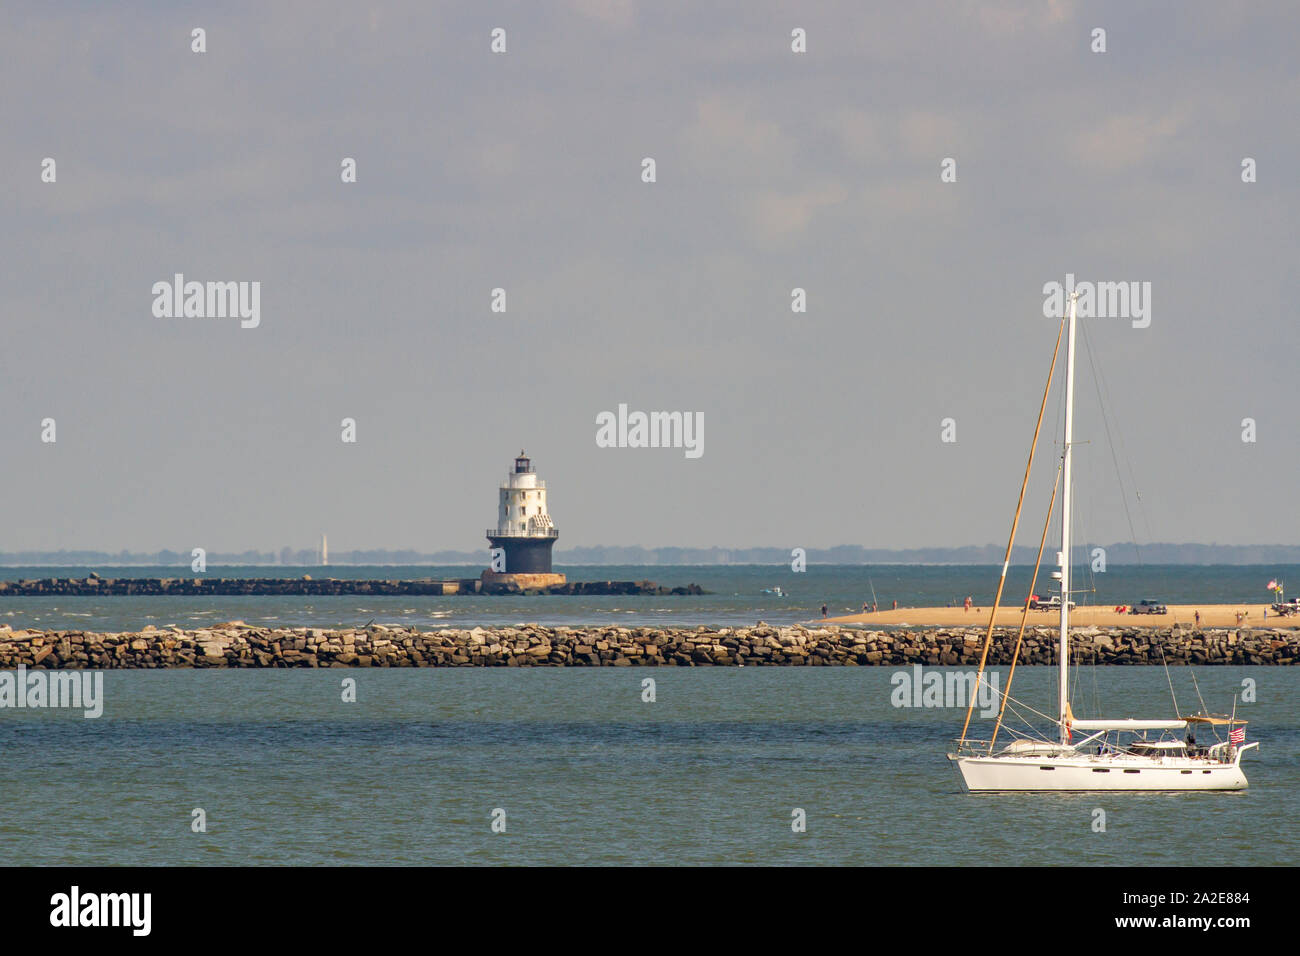 Lewes, Delaware - September 27, 2019 :  Tourists and sailboat at Harbor of Refuge Lighthouse off the coast of Lewes, Delaware in Lewes. Stock Photo